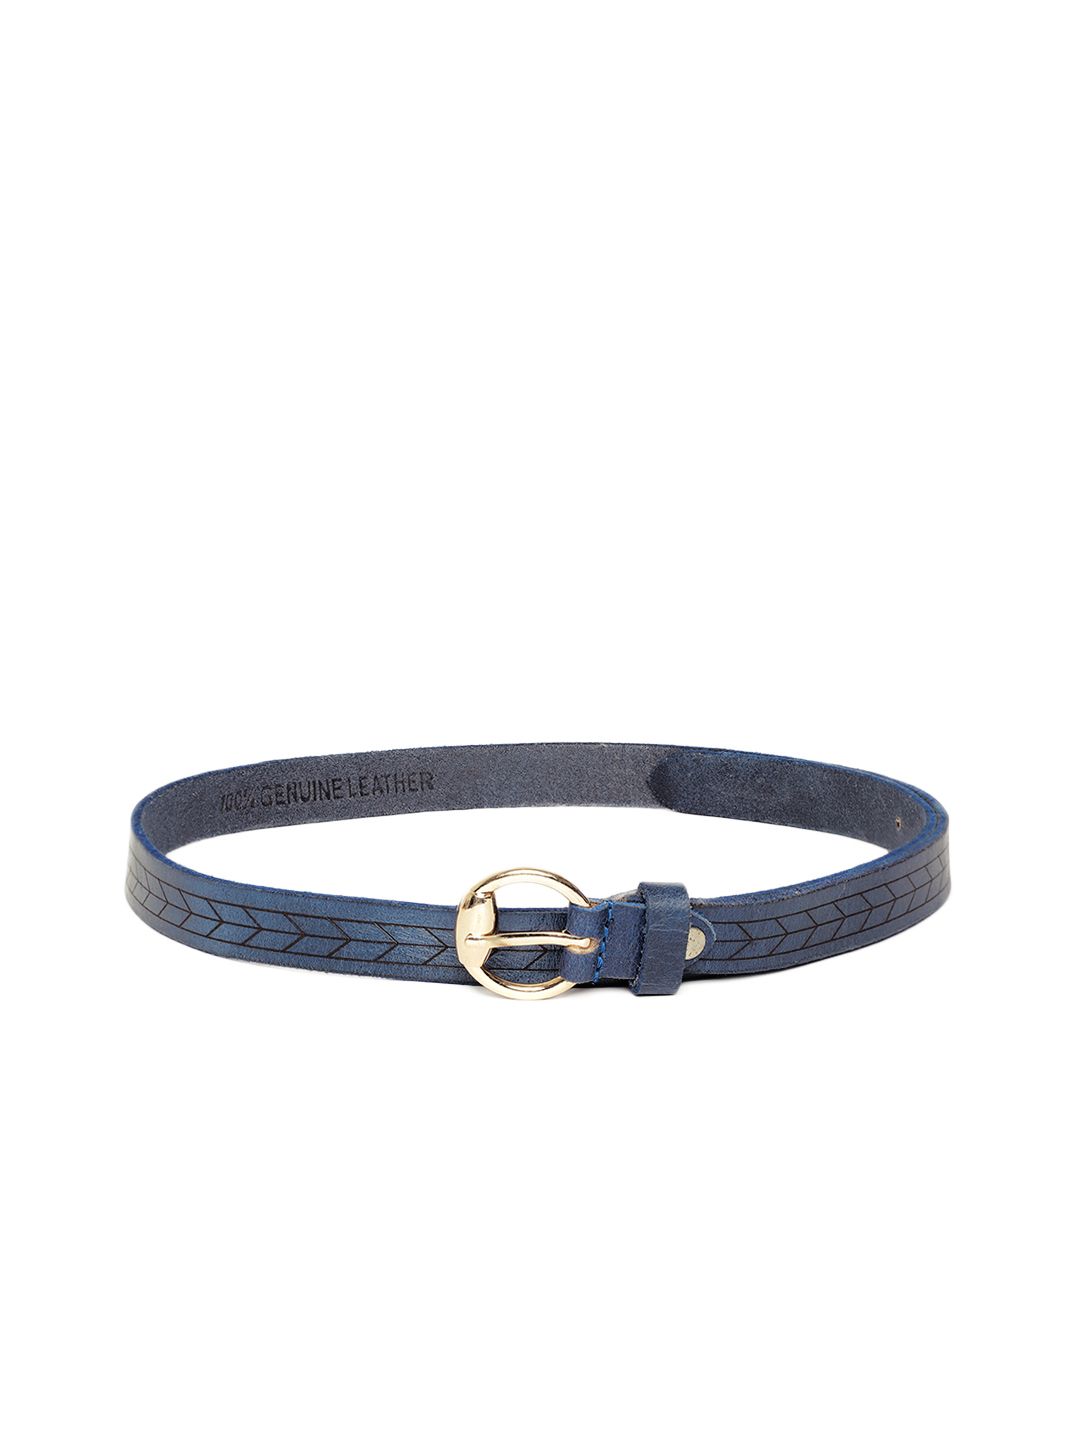 Mast & Harbour Women Navy Blue & Black Textured Leather Belt Price in India